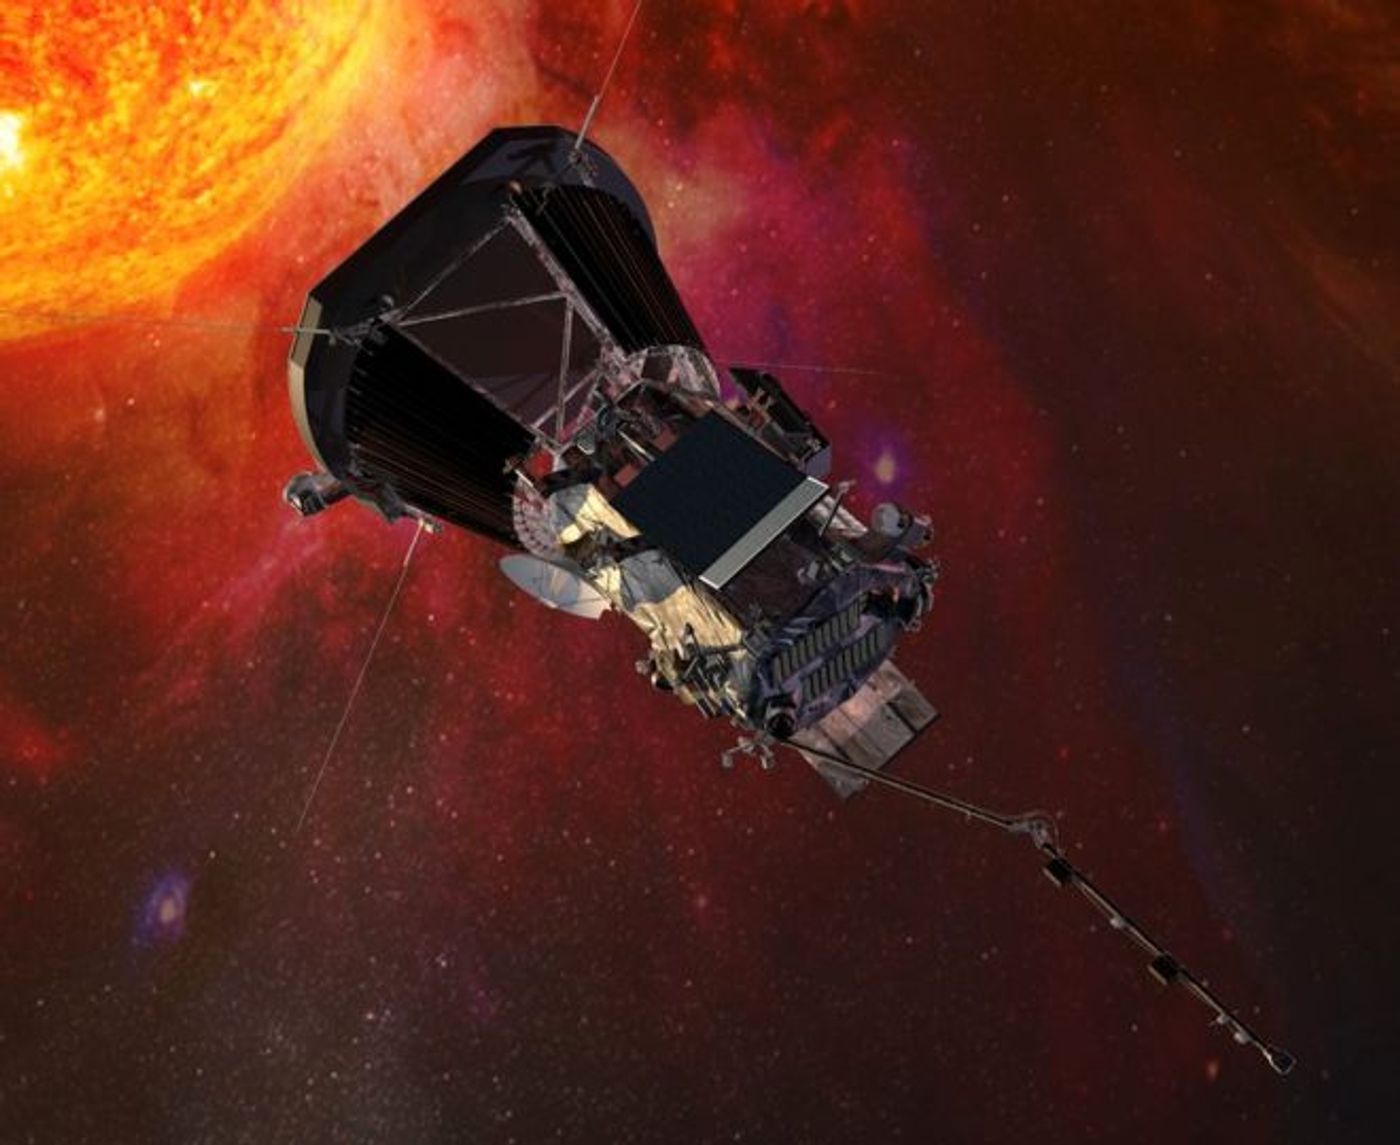 The Parker Solar Probe will venture closer to the Sun than any other spacecraft before it to learn more about our own star.